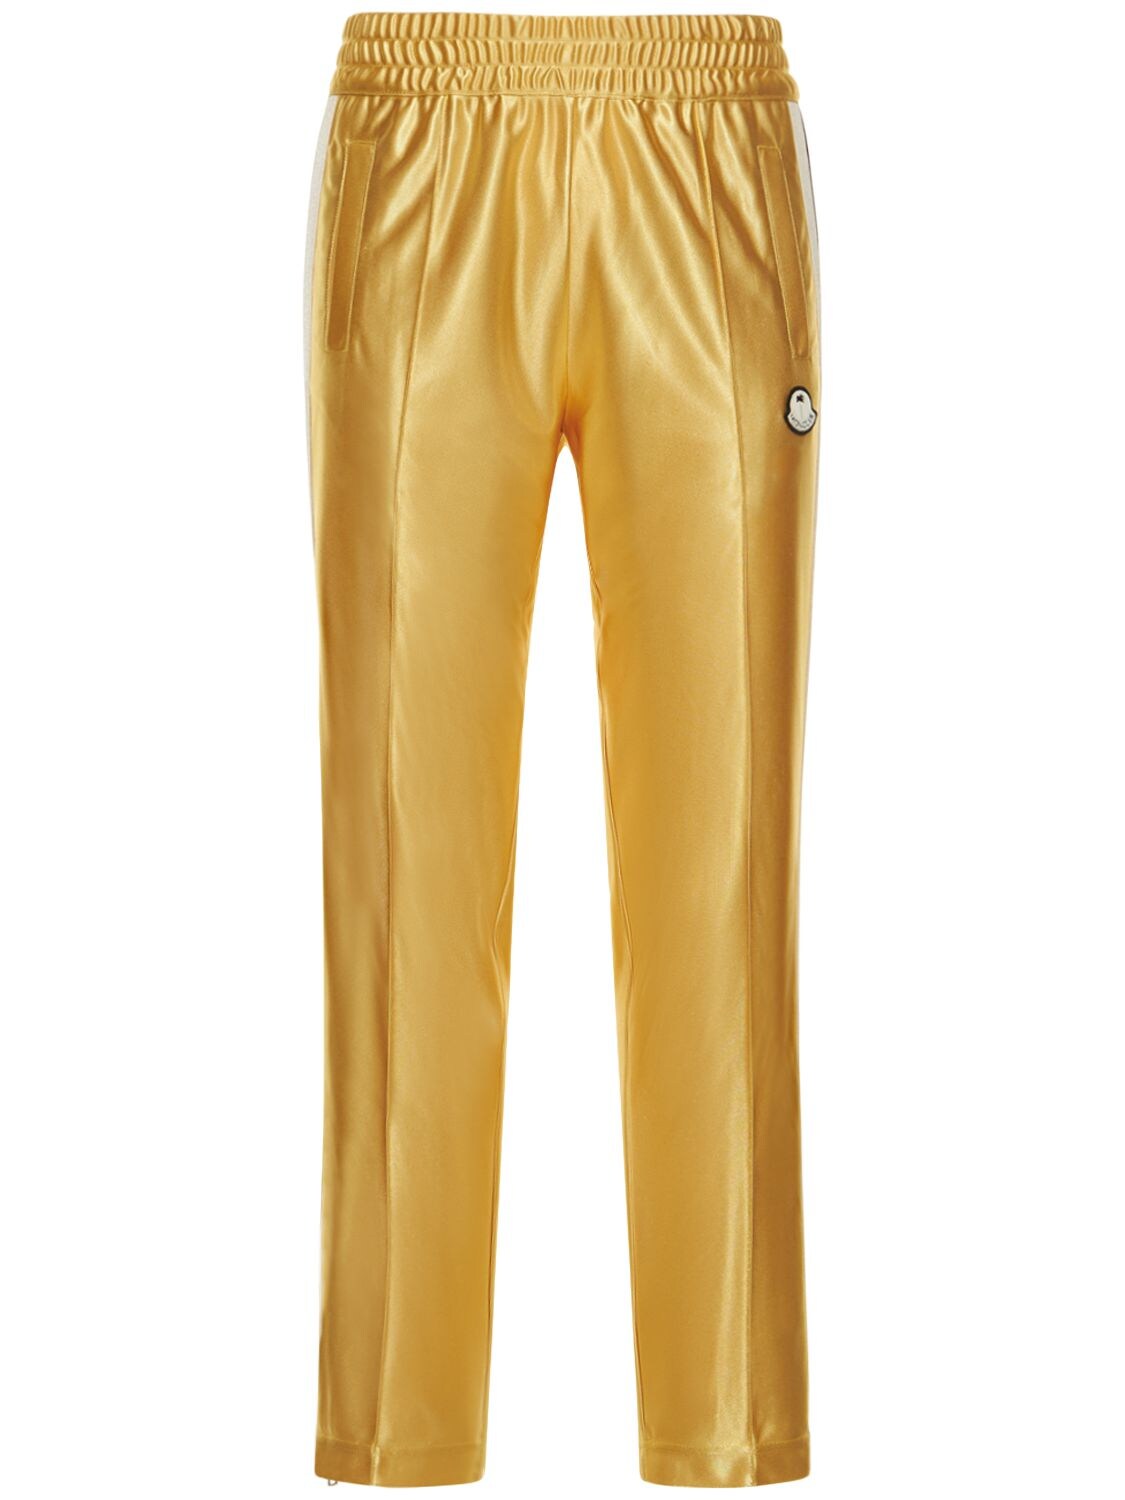 MONCLER GENIUS Glossy Jersey Track Pants